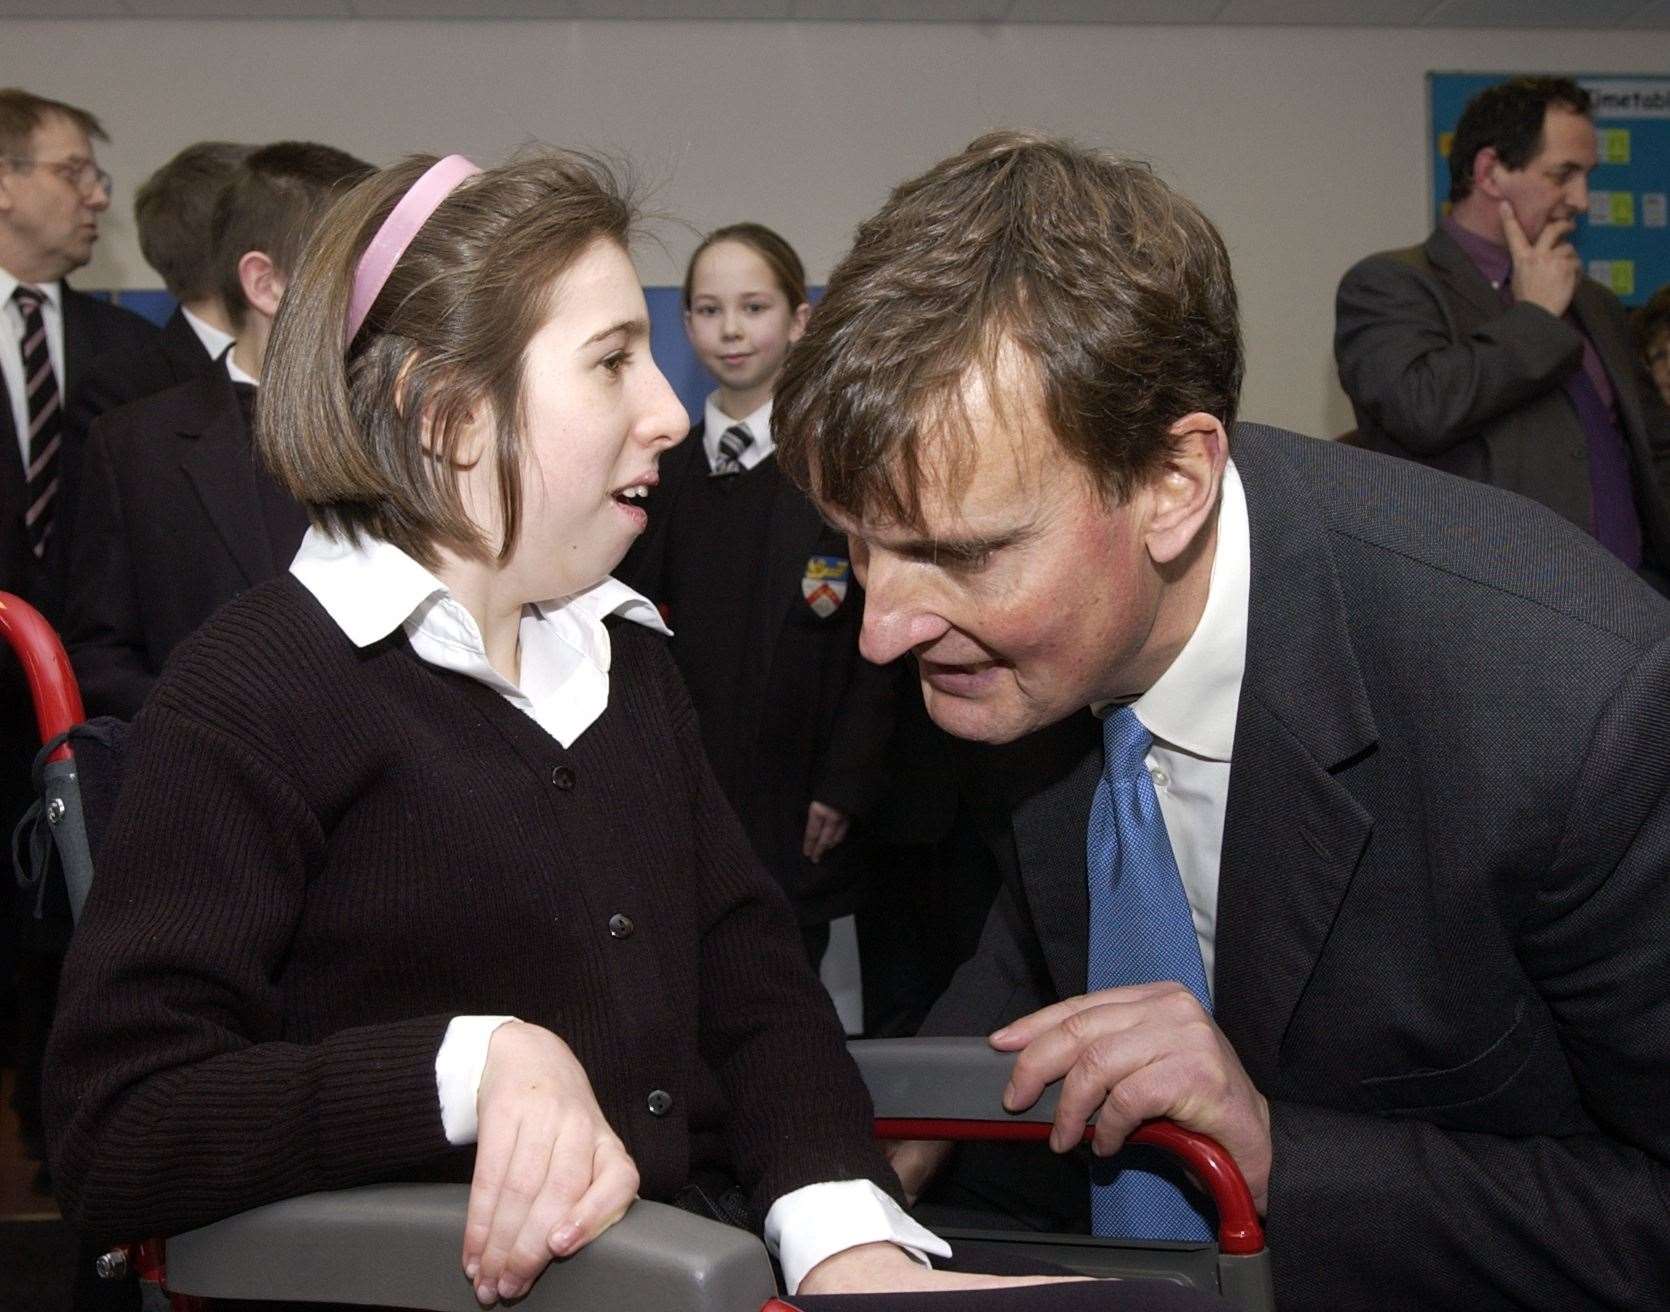 Back in 2002, Sir Paul Carter, in conversation with Victoria Butt, at the opening of an inclusion unit for special needs children at the Hartsdown Community College